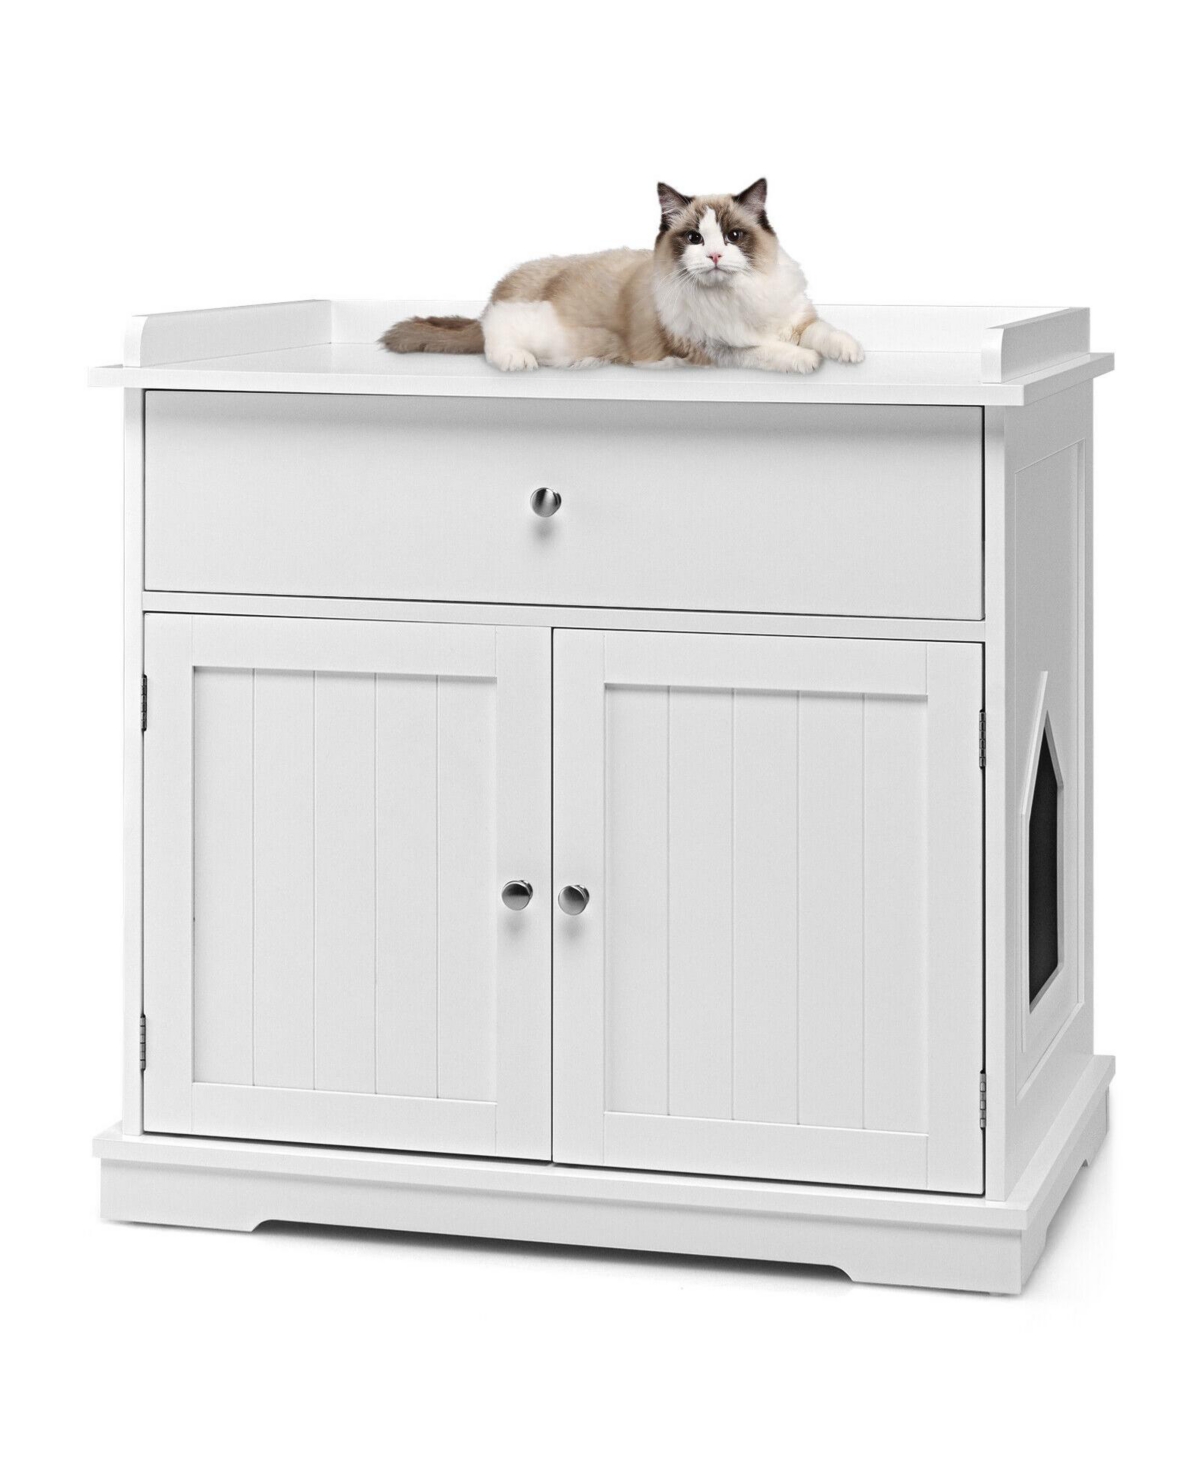 Wooden Cat Litter Box Enclosure with Drawer Side Table Furniture - White